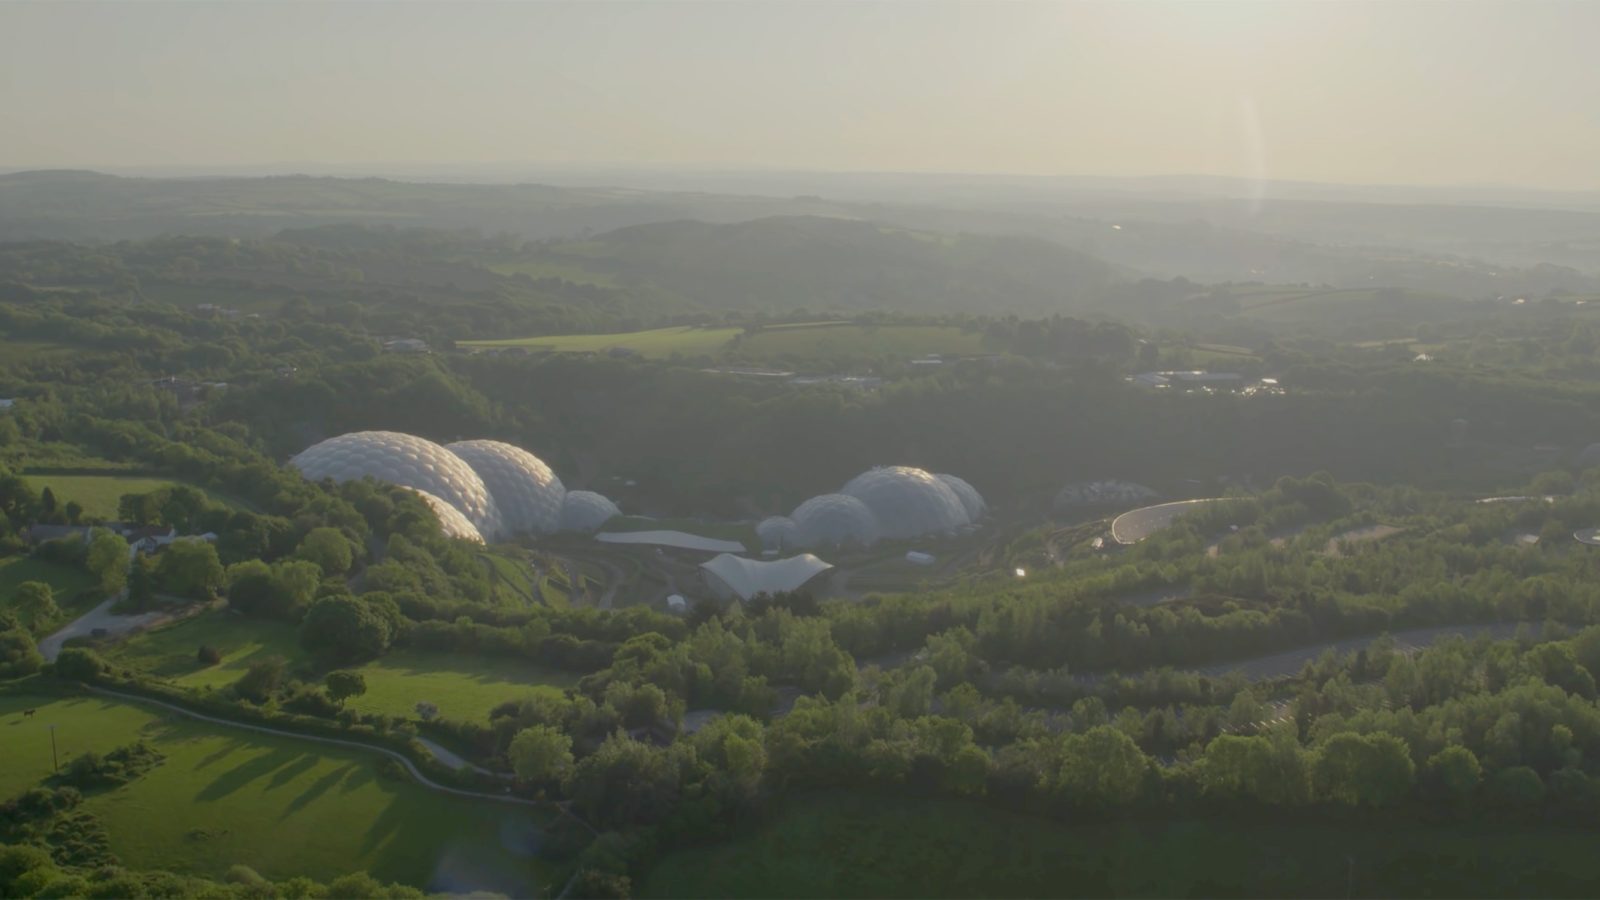 Eden Project aerial photo showing the Eden Project site